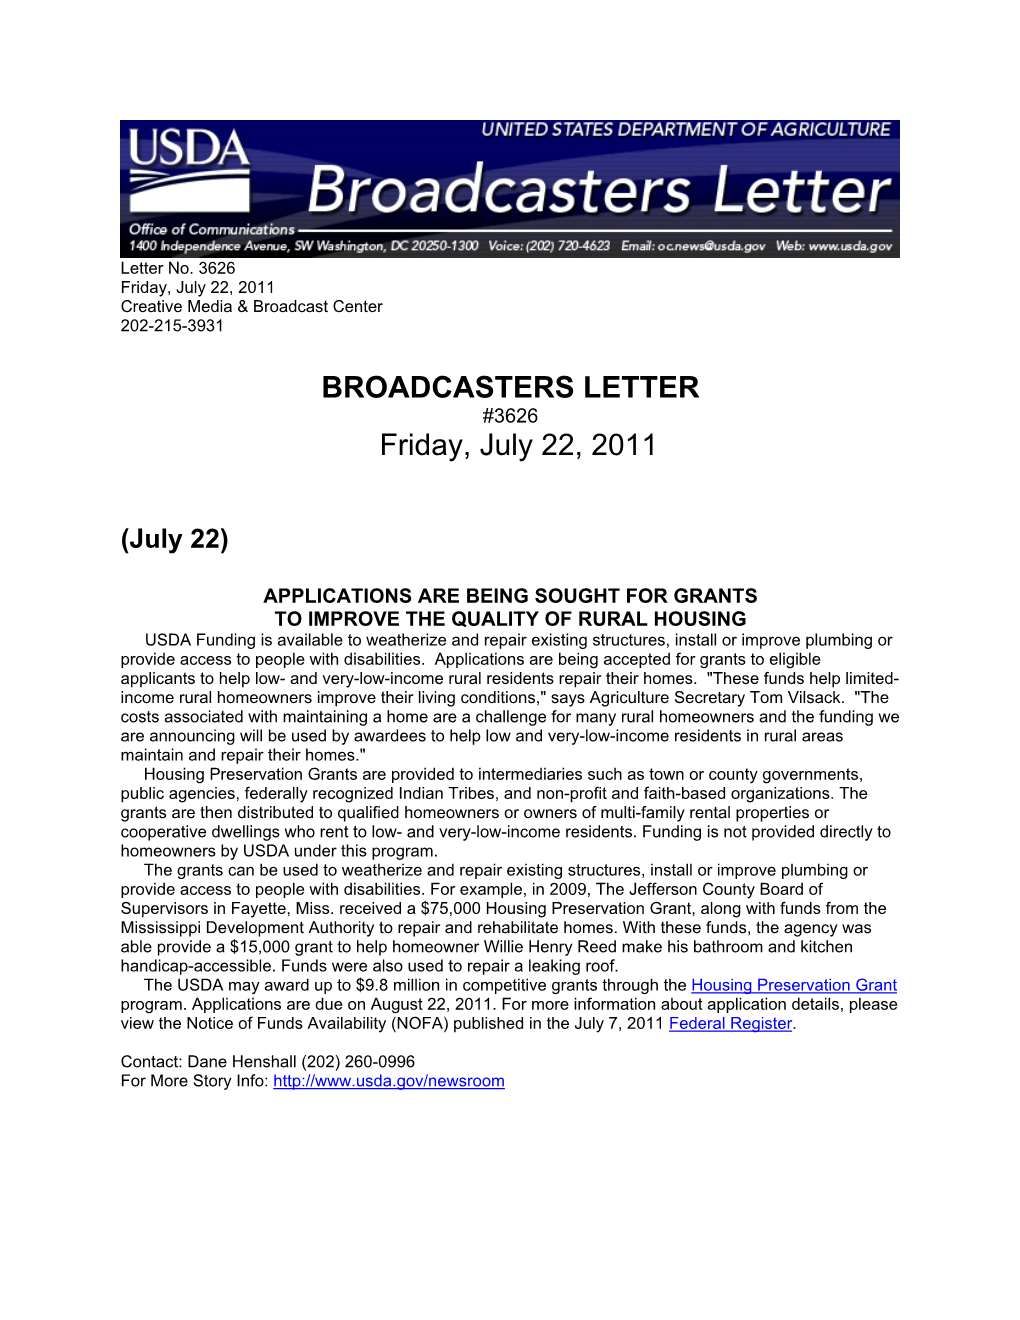 BROADCASTERS LETTER Friday, July 22, 2011